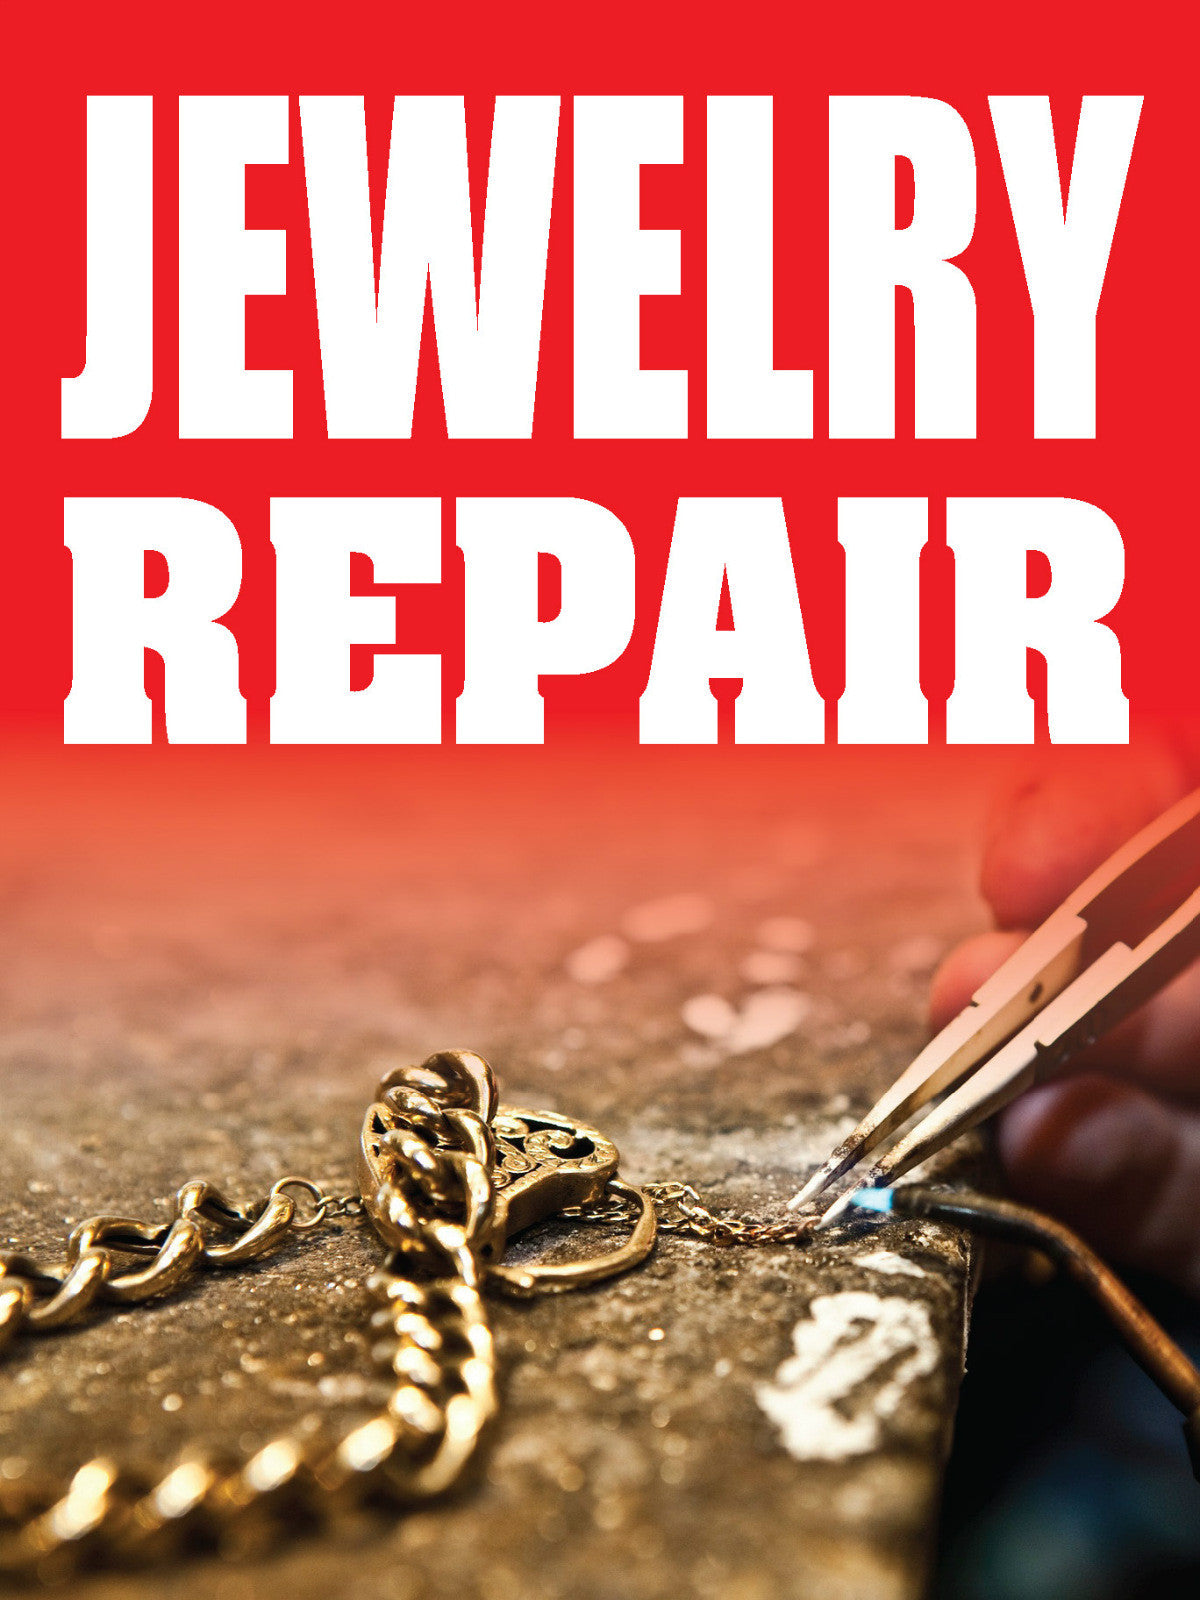 Jewelry Repair 18x24 Business Store Retail Signs 